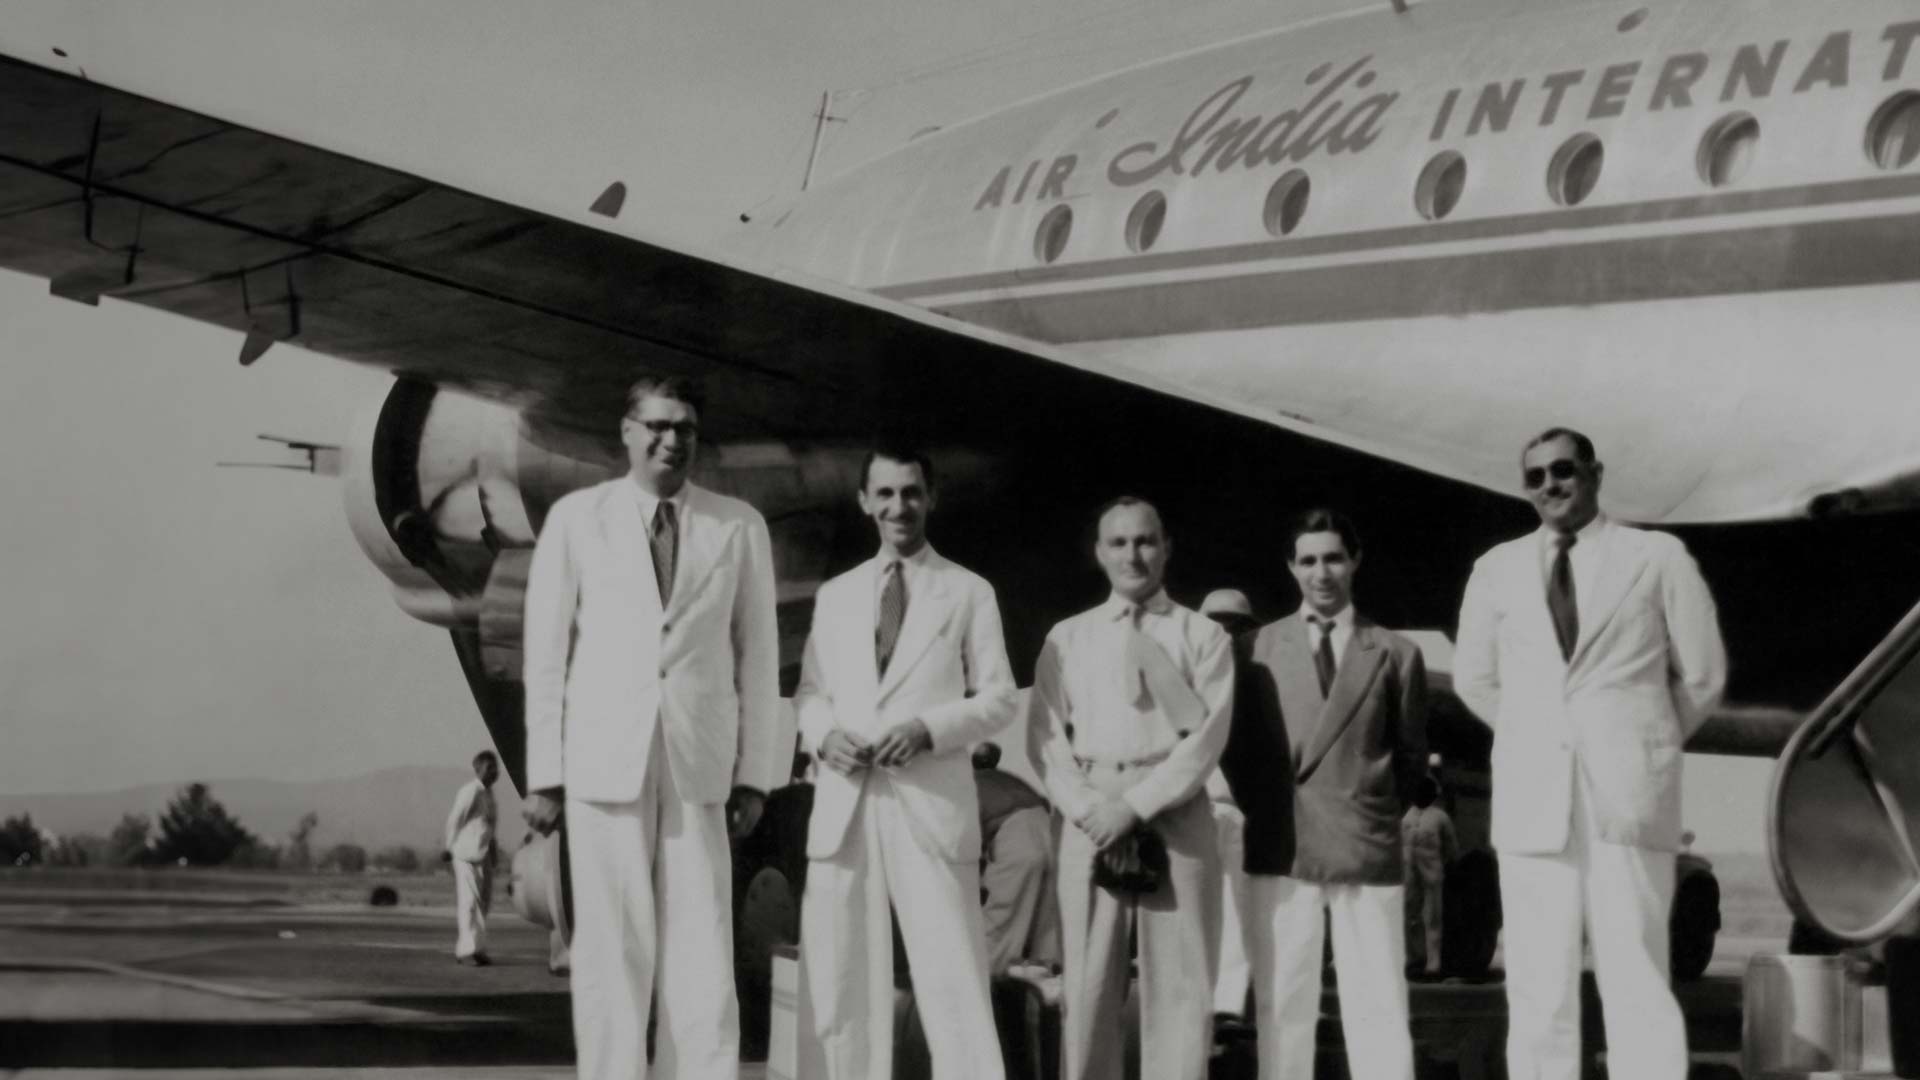 JRD Tata and colleagues after the arrival of the inaugural DEL-BOM flight in 1948